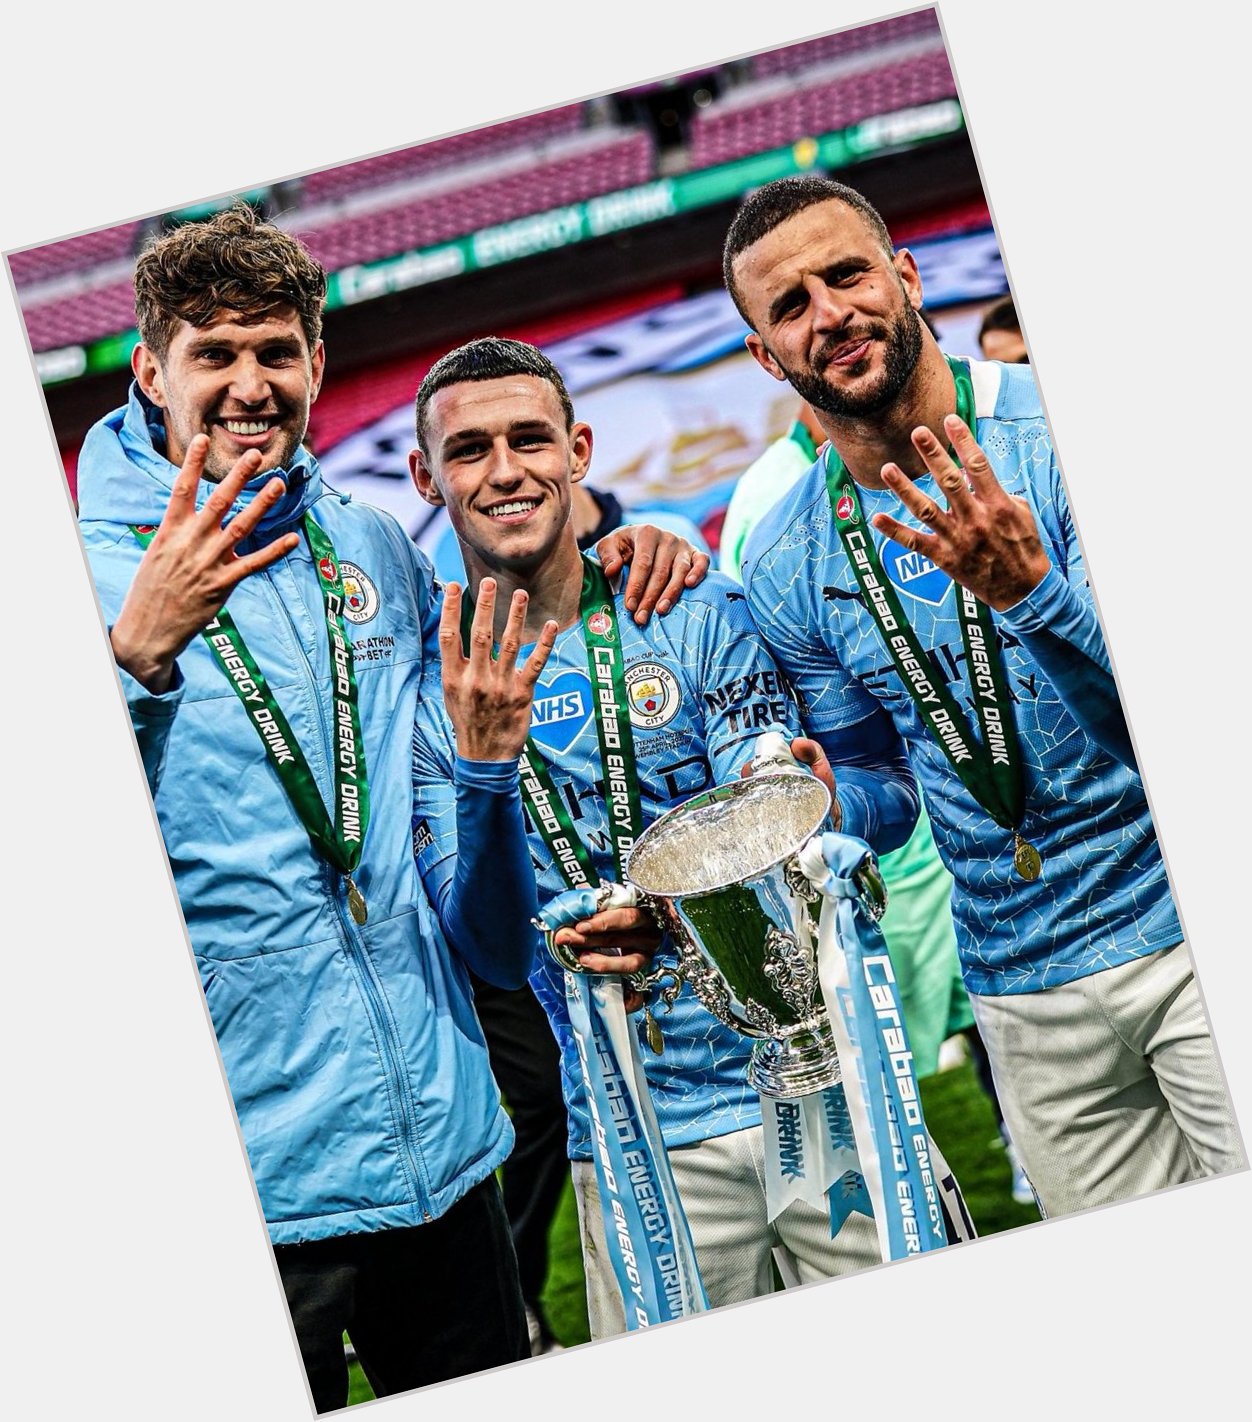 Happy birthday John Stones, Phil Foden and Kyle Walker!

The three Man City players share the same birthday 